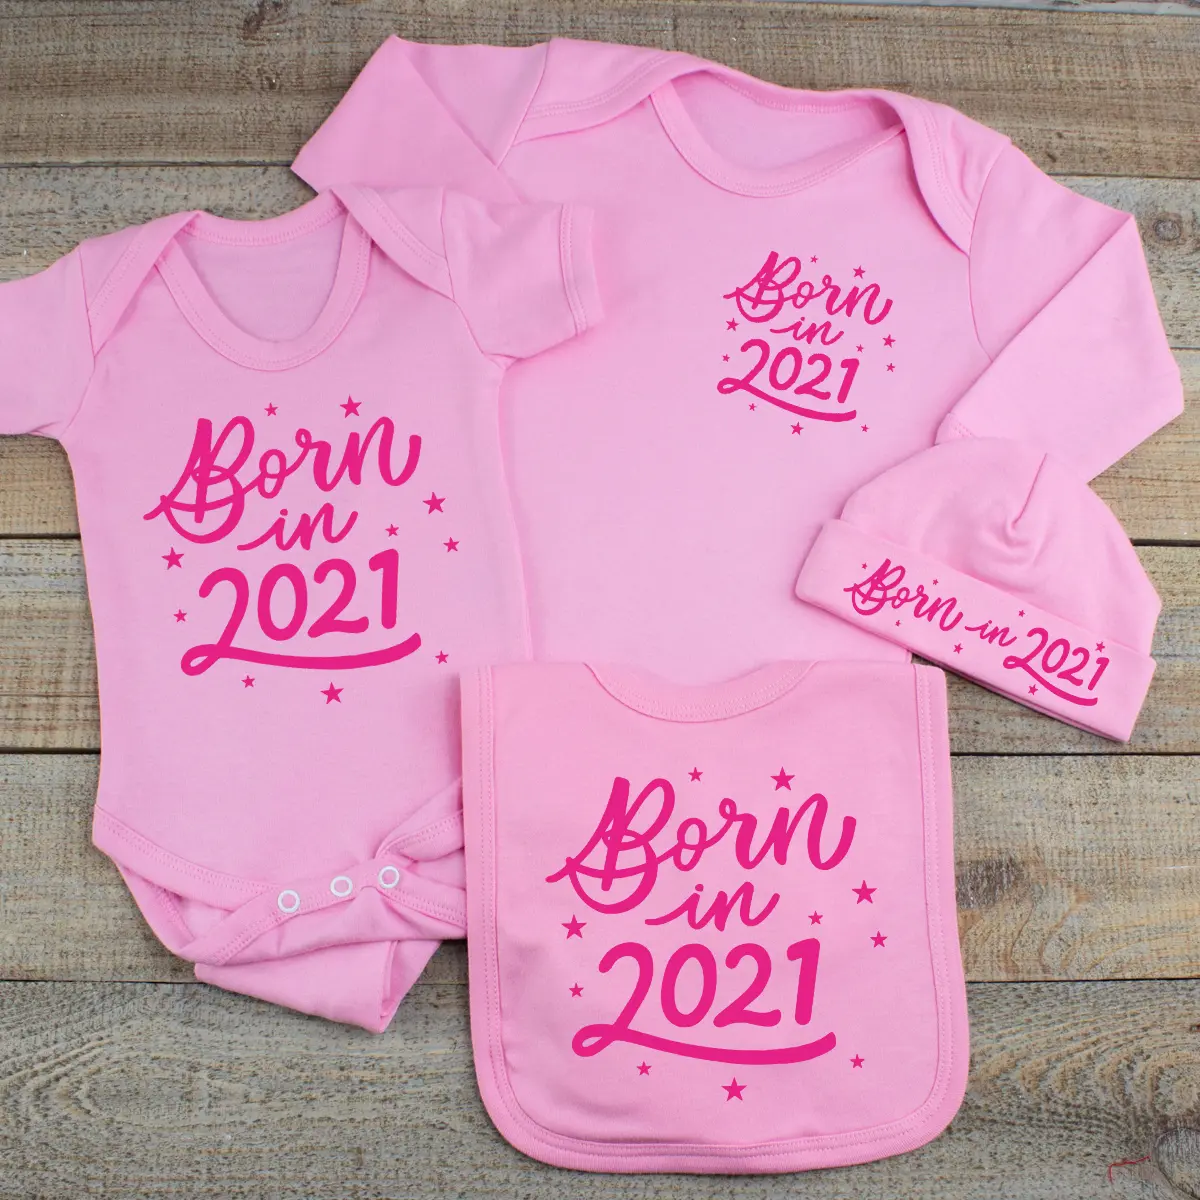 Baby Girl Born in 2021 Clothes Gift Set